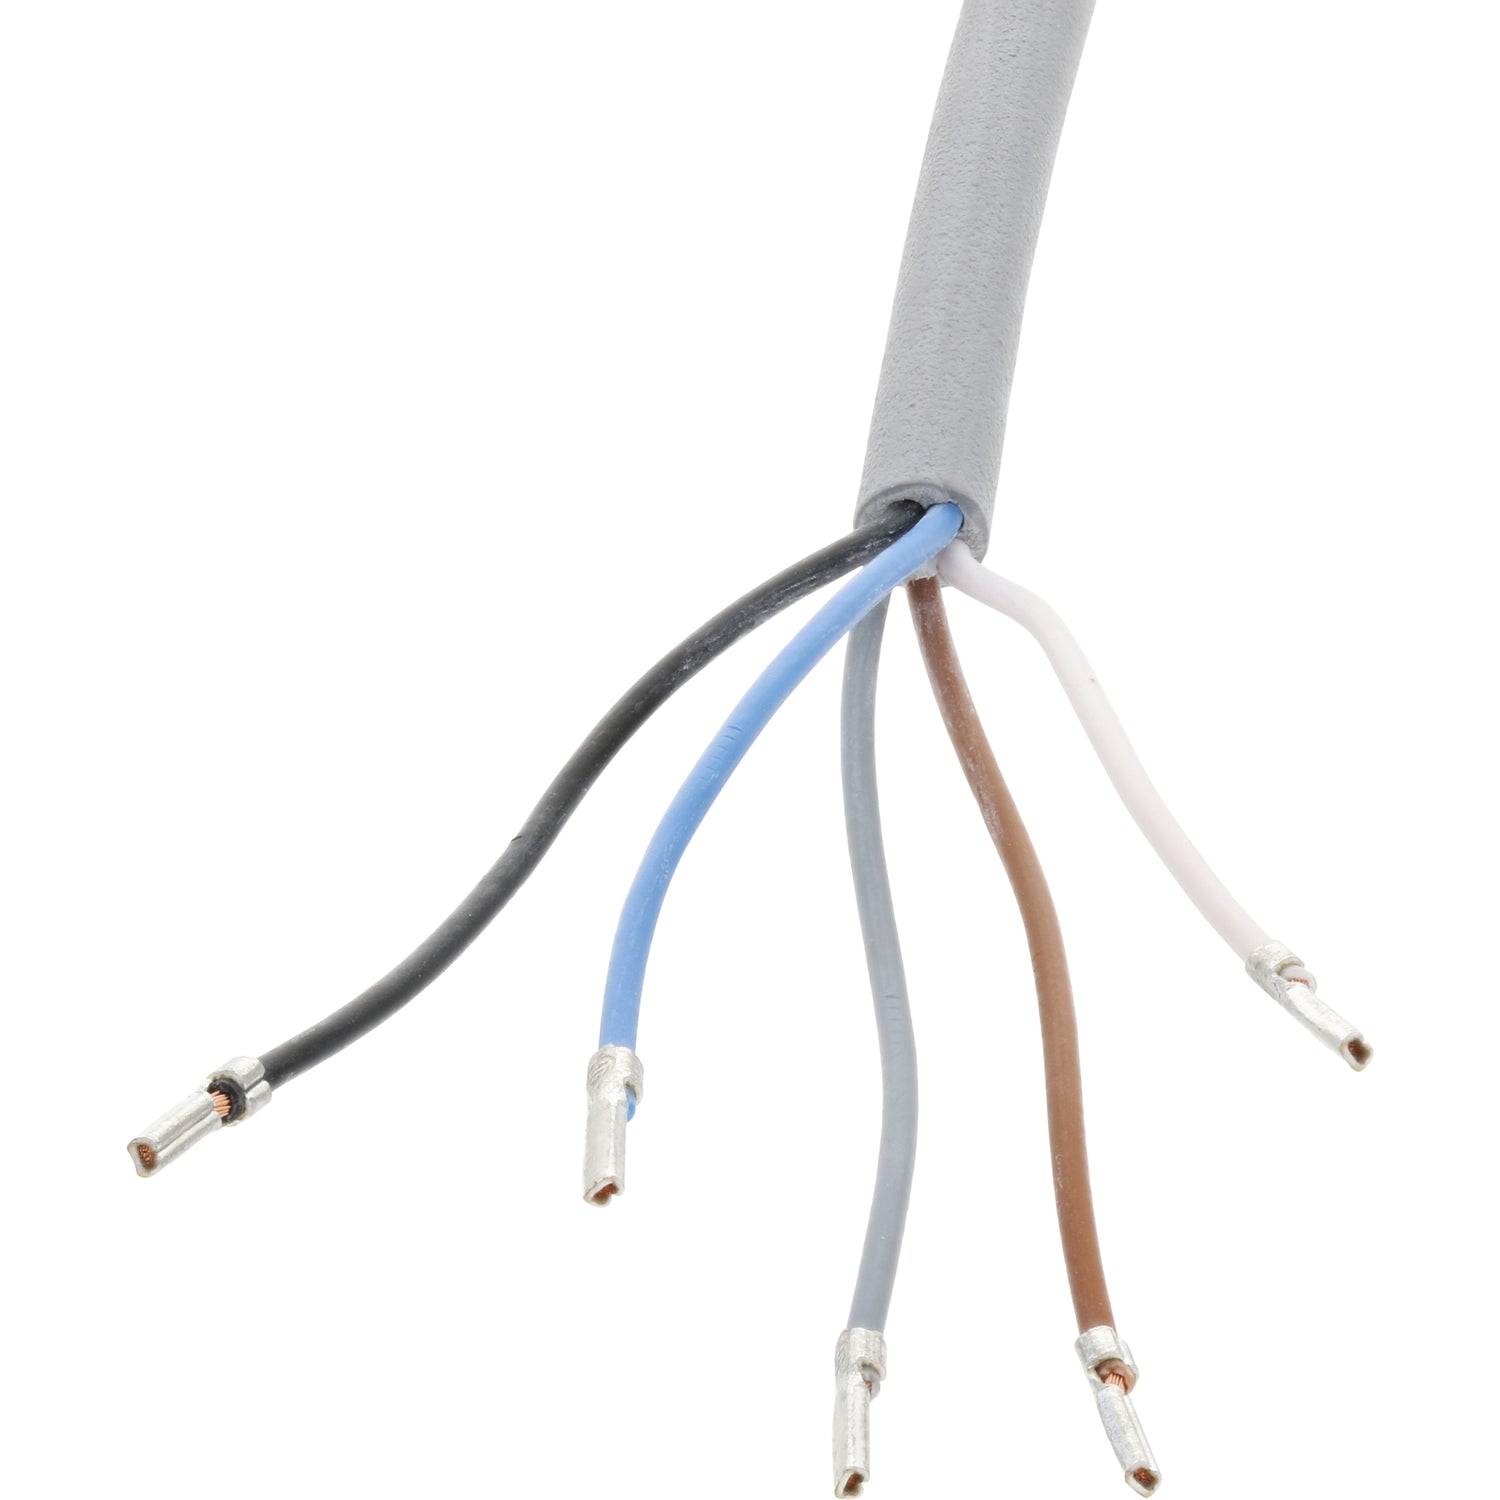 Grey connecting cable with exposed black, blue, grey, brown and white wires on white background.